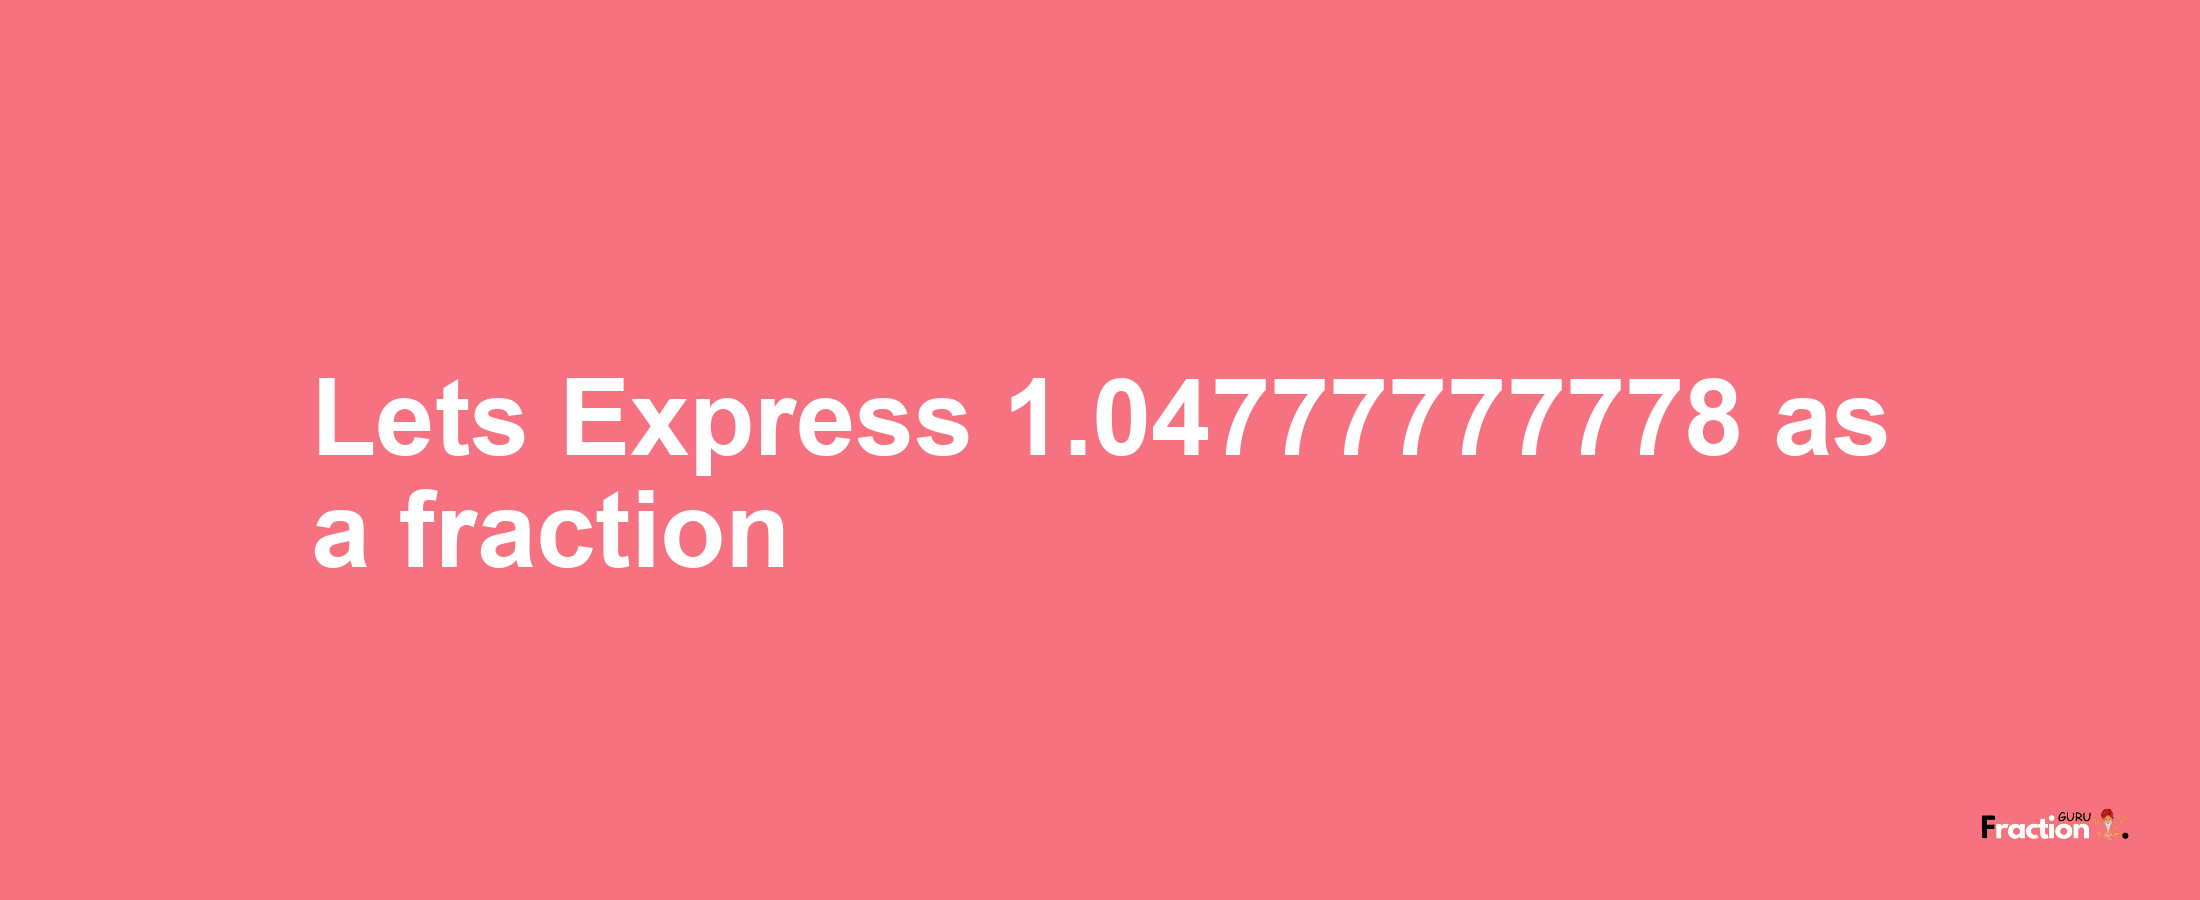 Lets Express 1.04777777778 as afraction